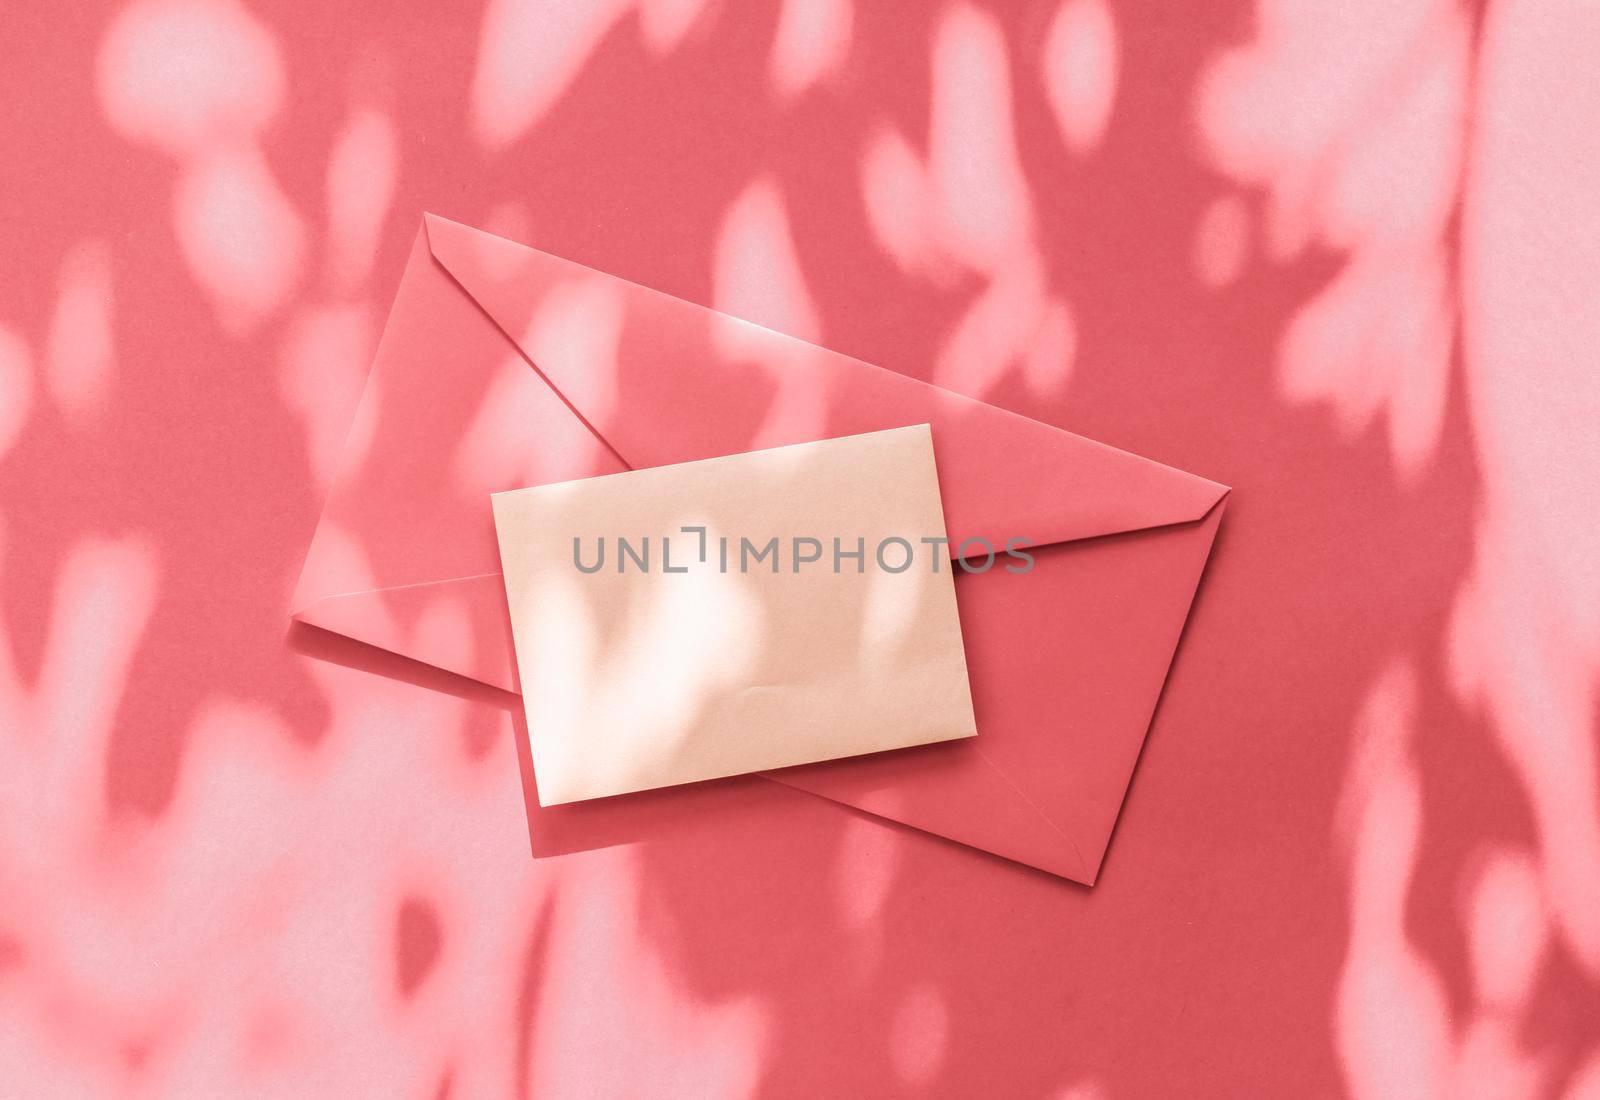 Beauty brand identity as flatlay mockup design, business card and letter for online luxury branding on coral shadow background by Anneleven